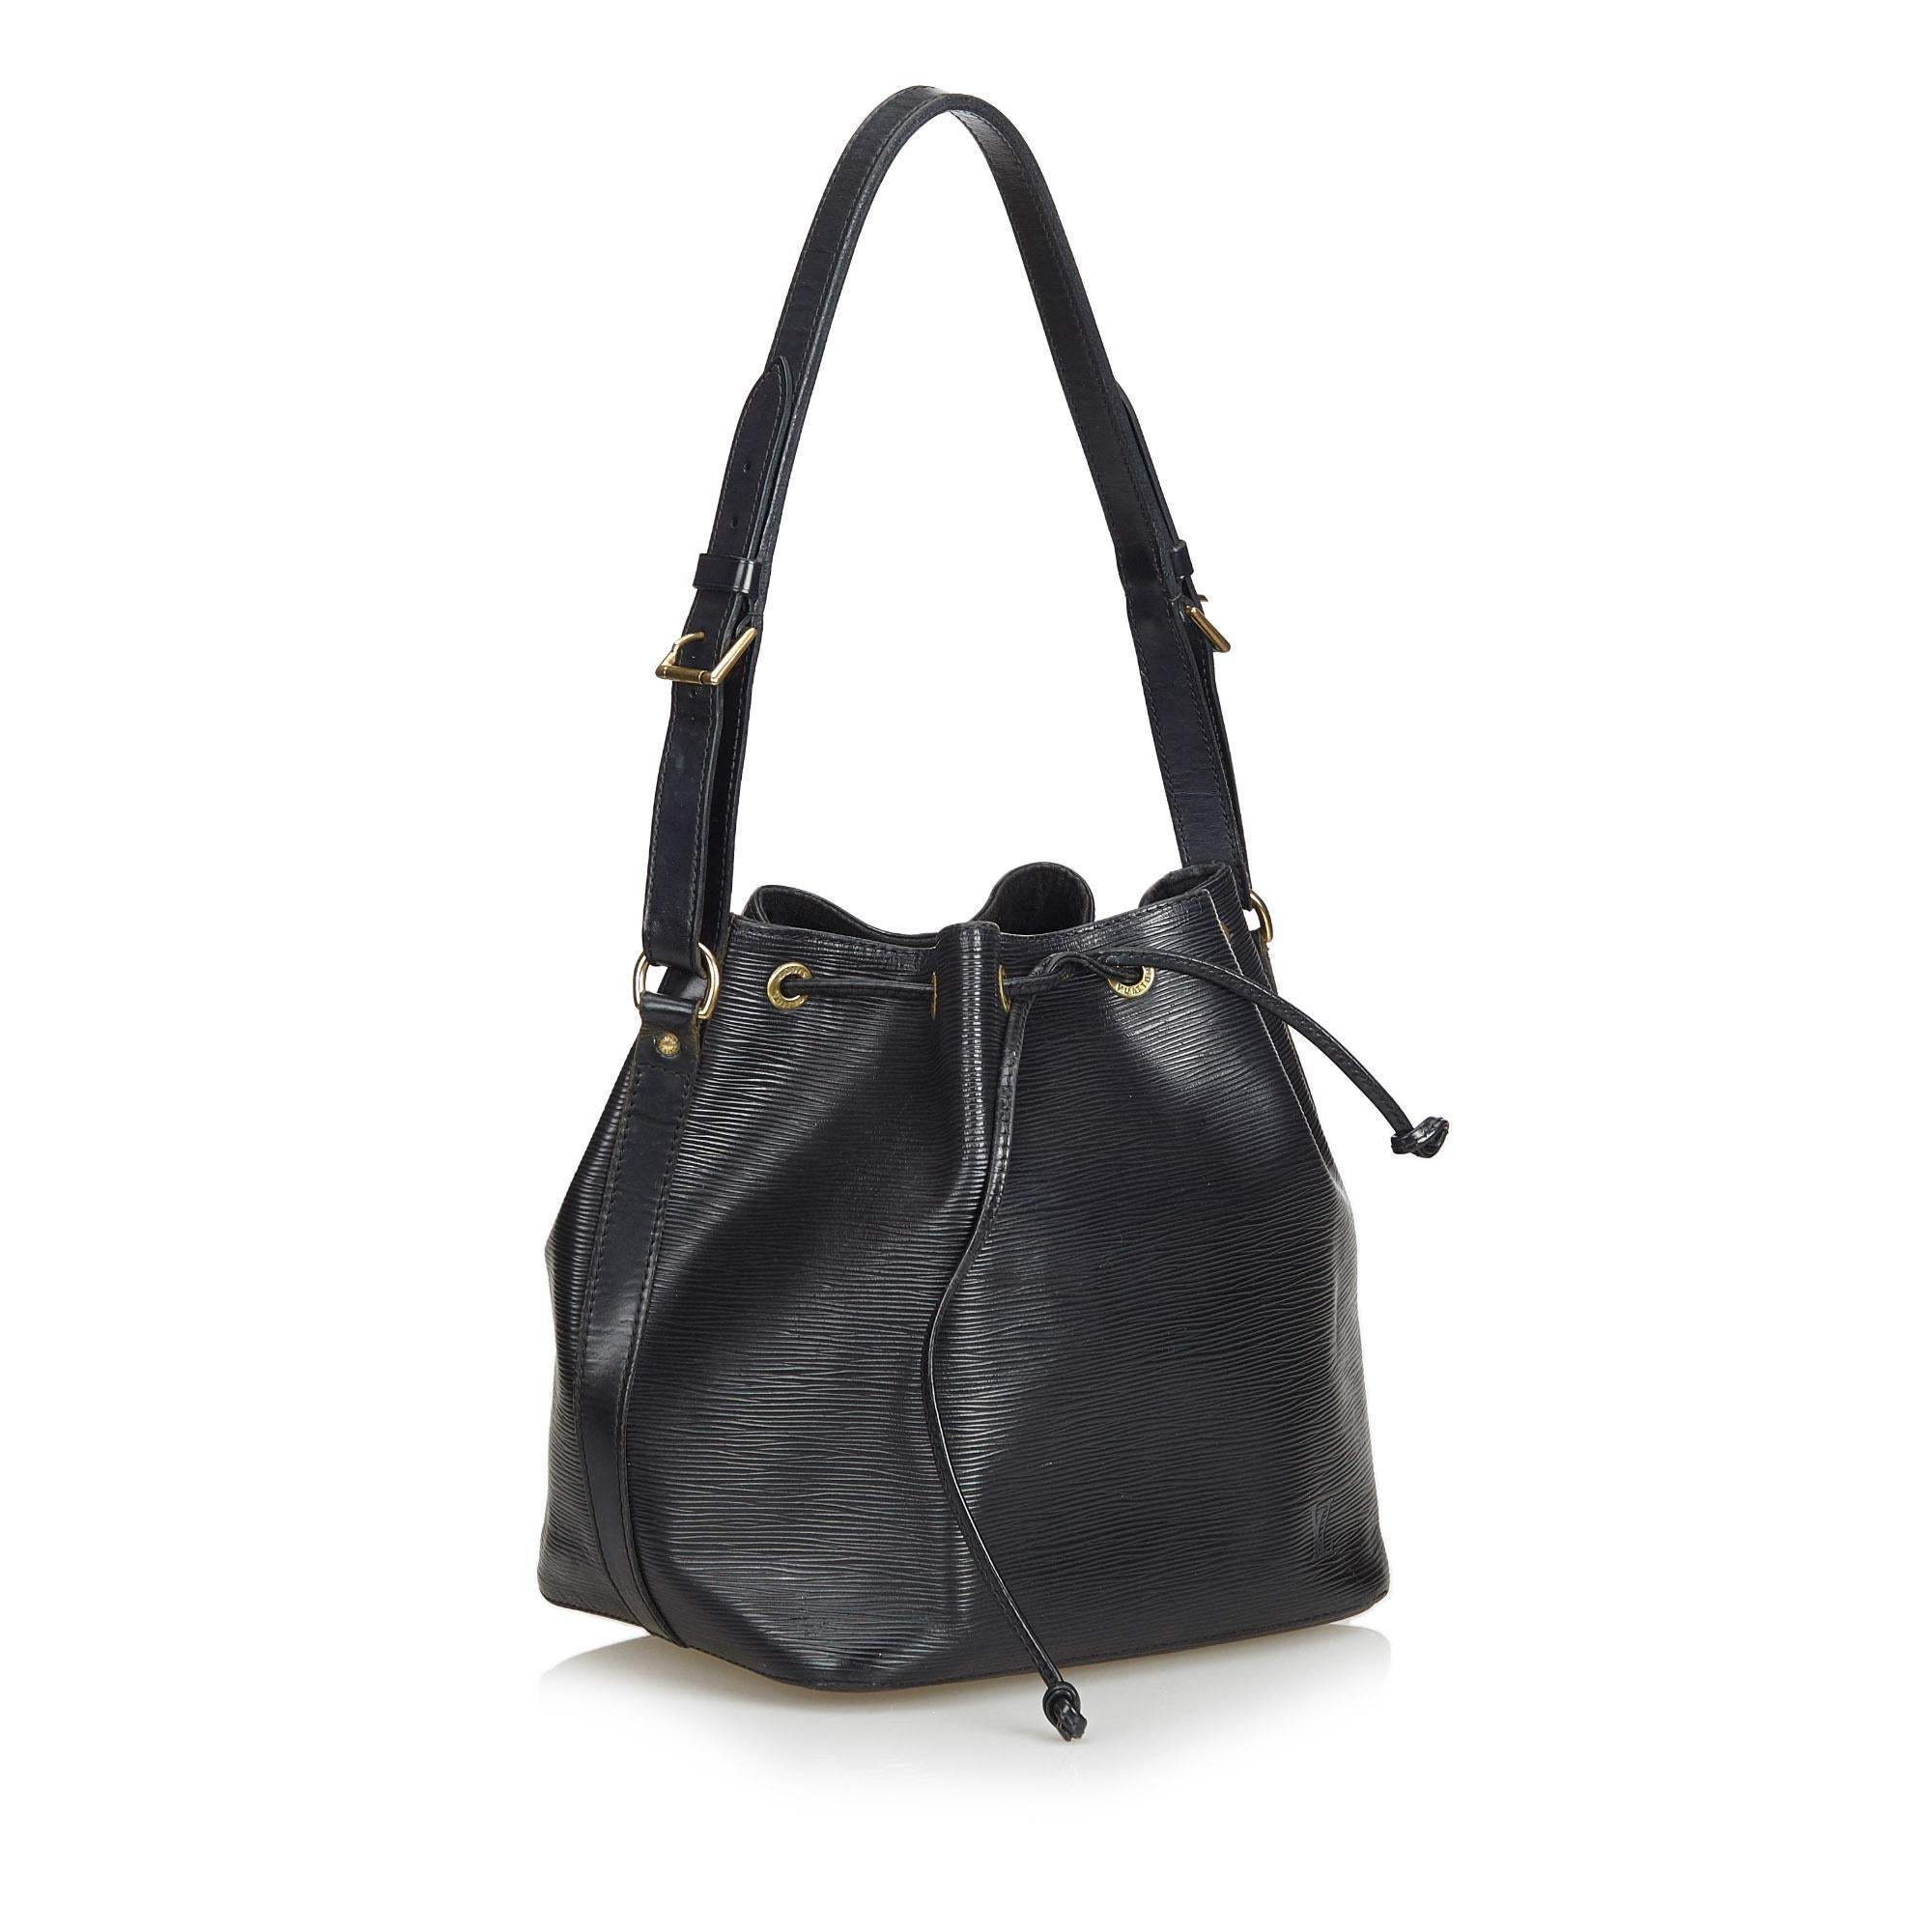 The Petit Noe features Epi leather, an adjustable shoulder strap, a drawstring closure, Alcantara lining, and an interior zip pocket. It carries as B condition rating.

Inclusions: 
This item does not come with inclusions.


Louis Vuitton pieces do